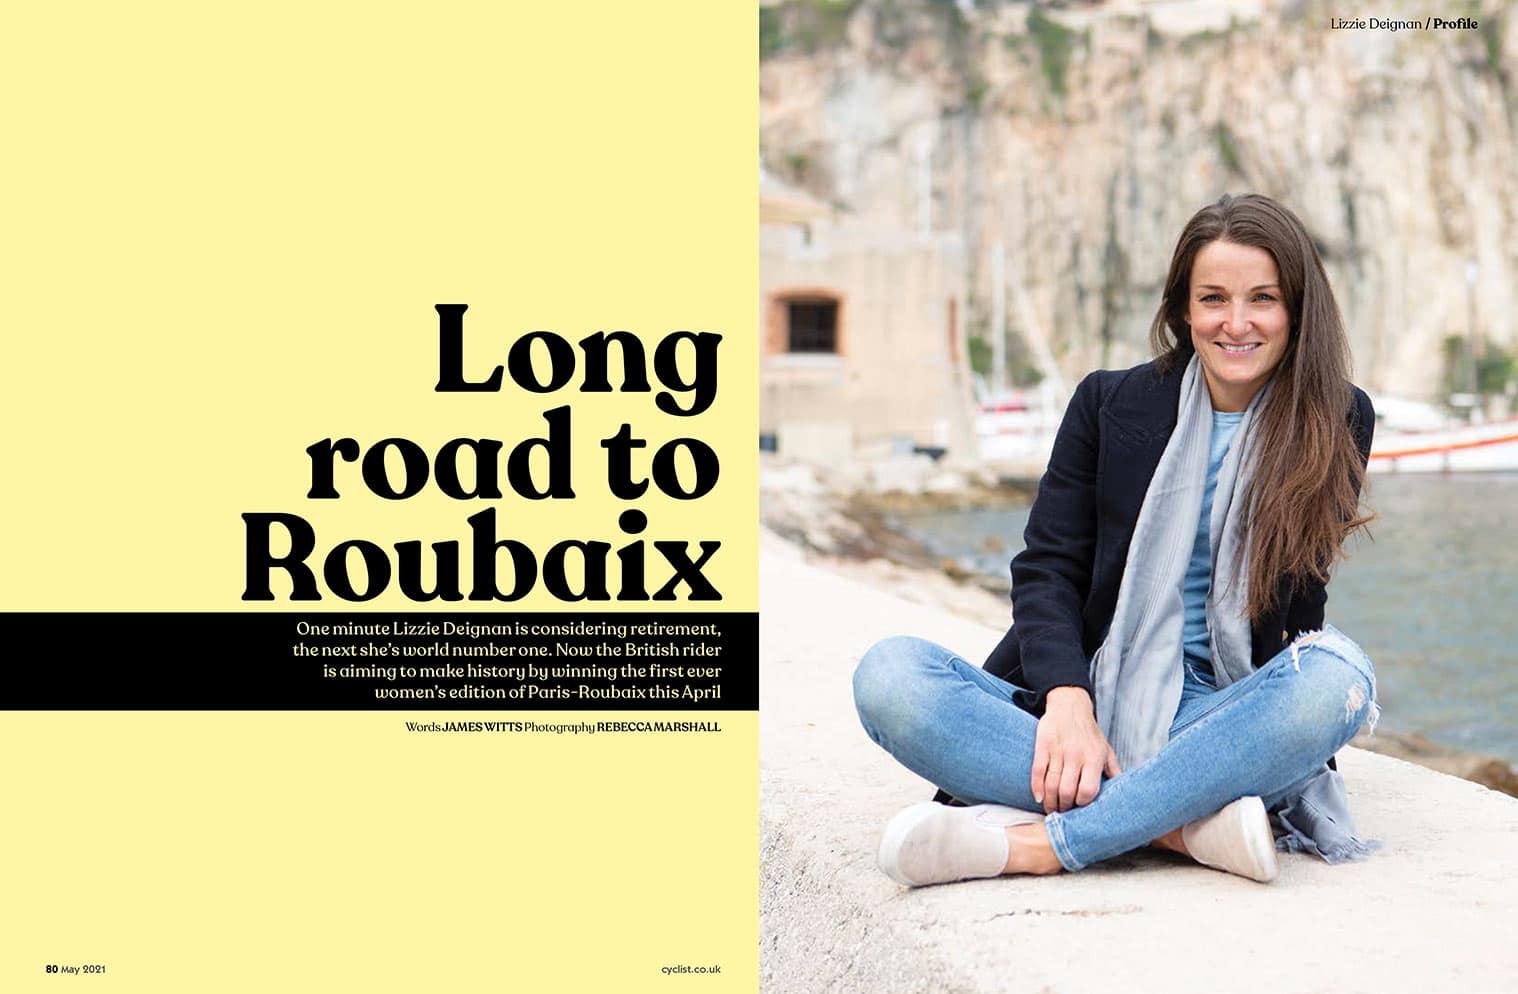 Double page spread from magazine showing portrait of Lizzie Deignan sitting on a wall, right